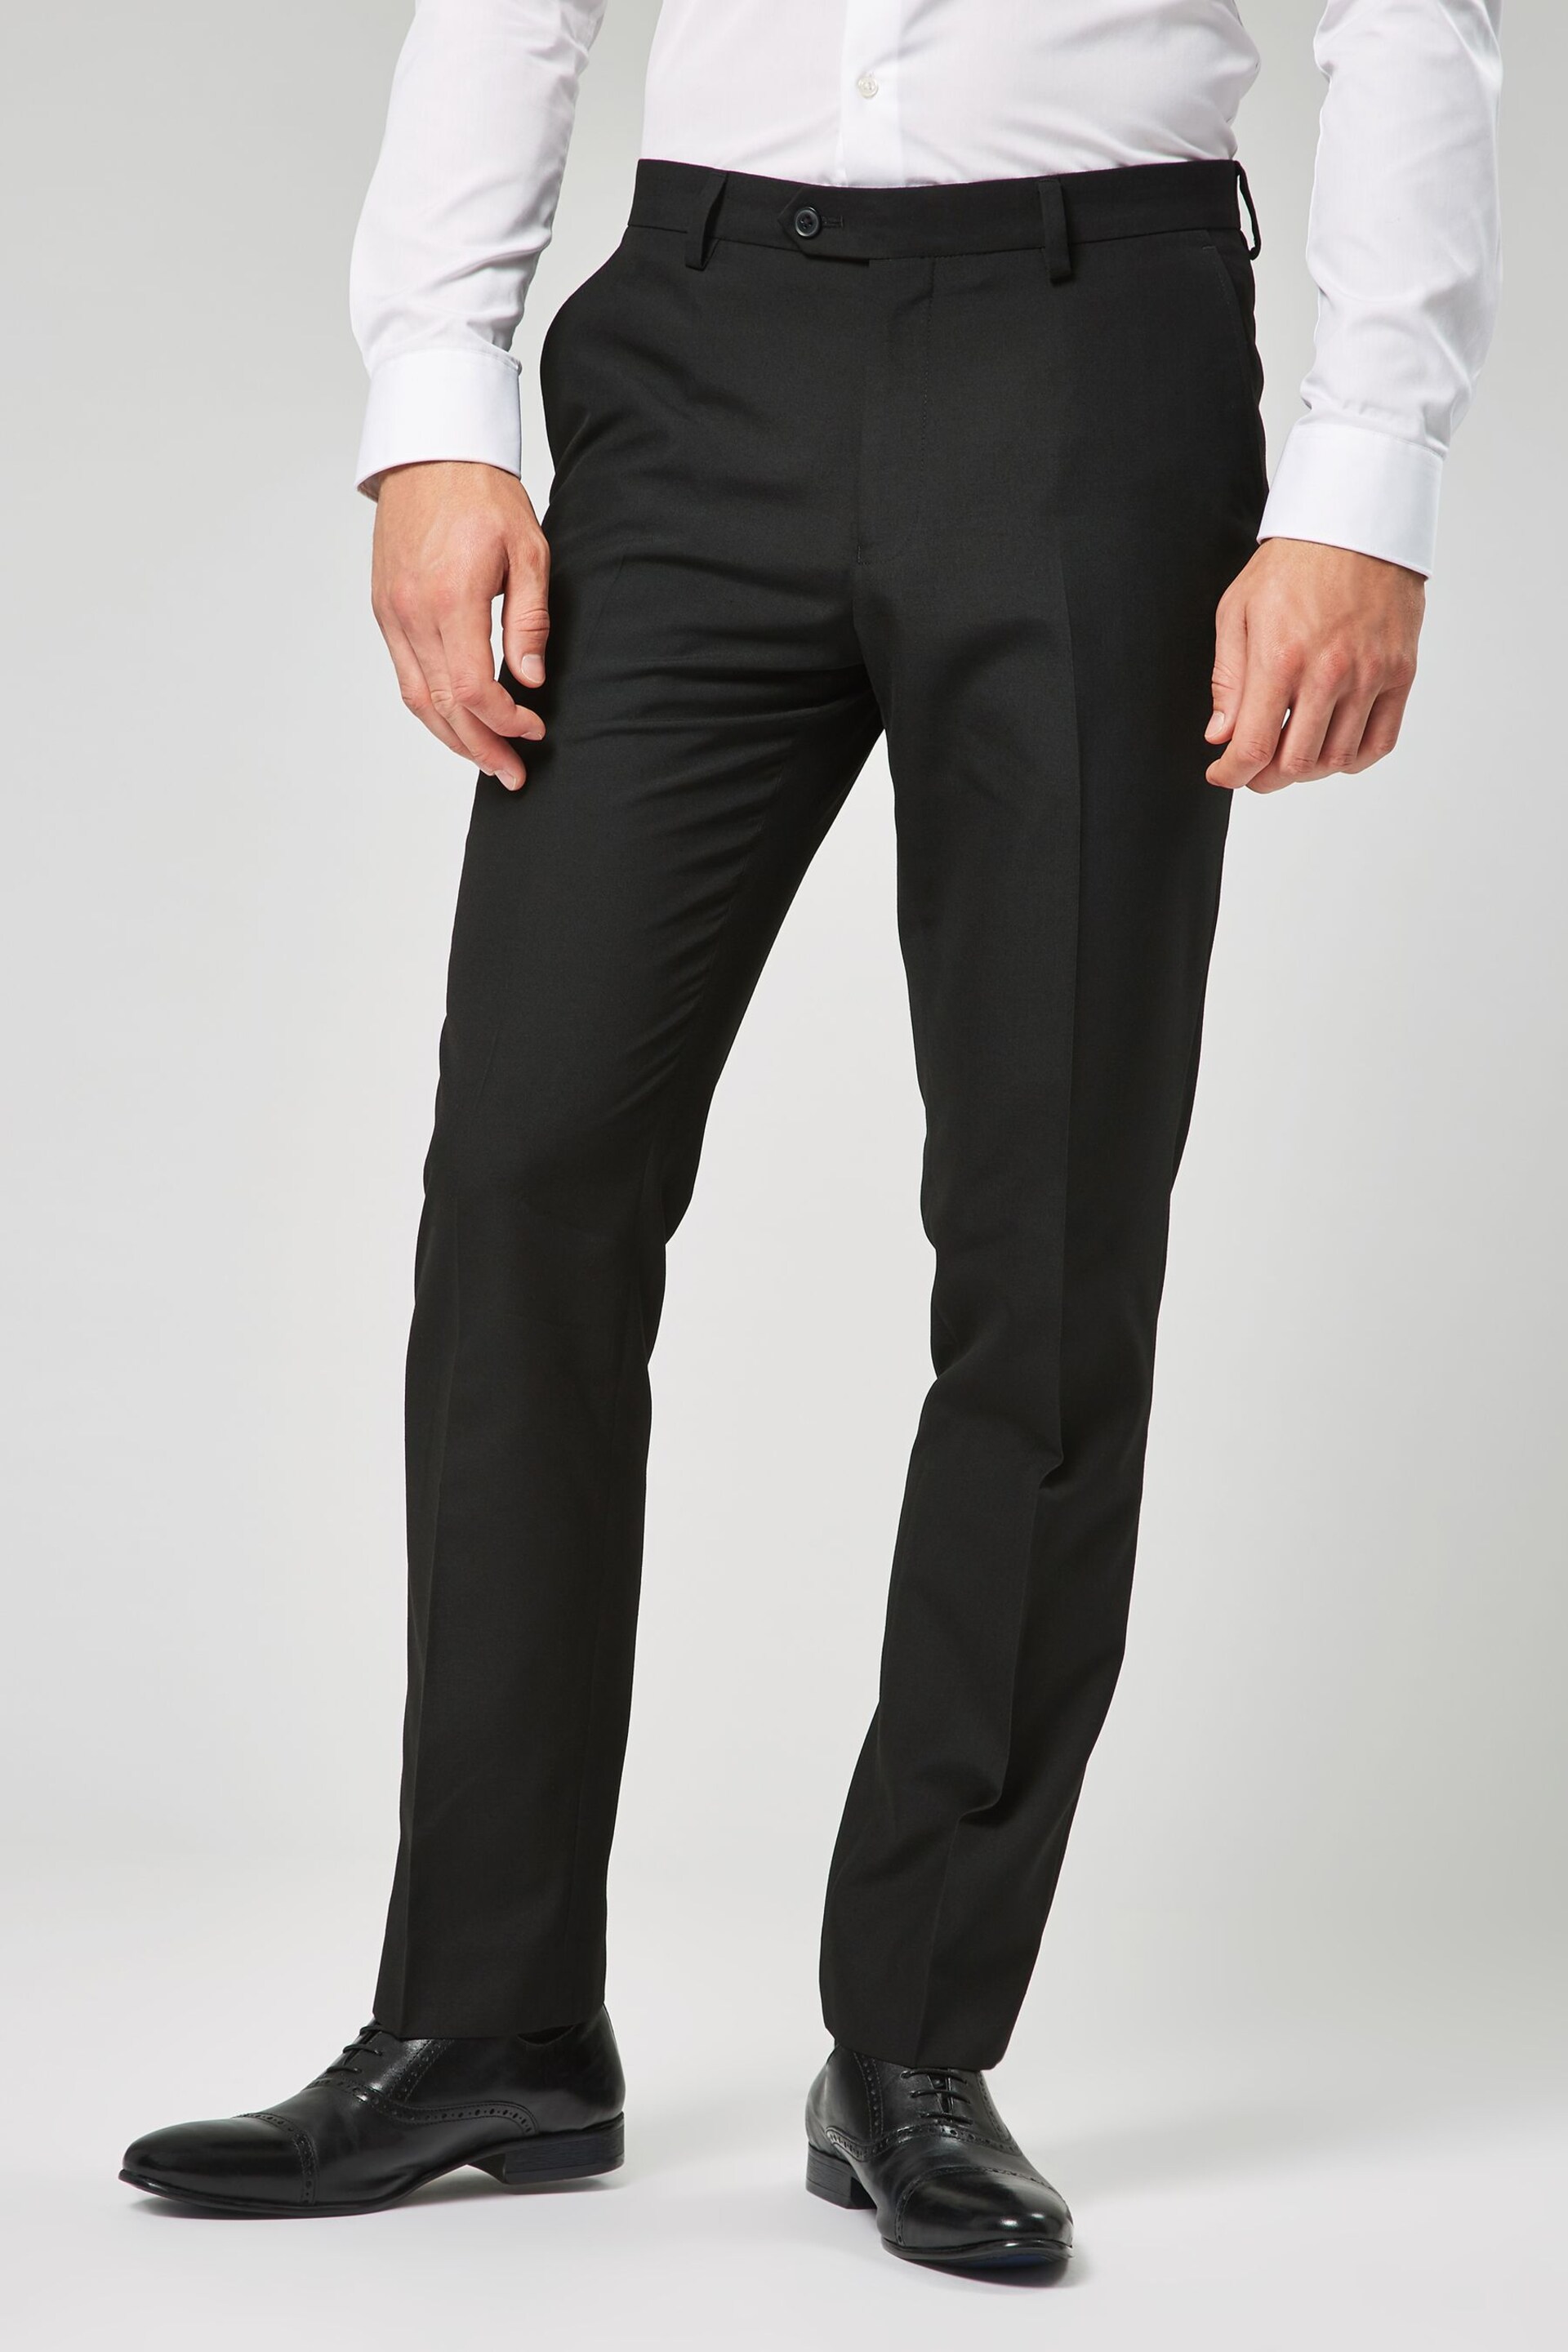 Black Tailored Suit Trousers - Image 1 of 8